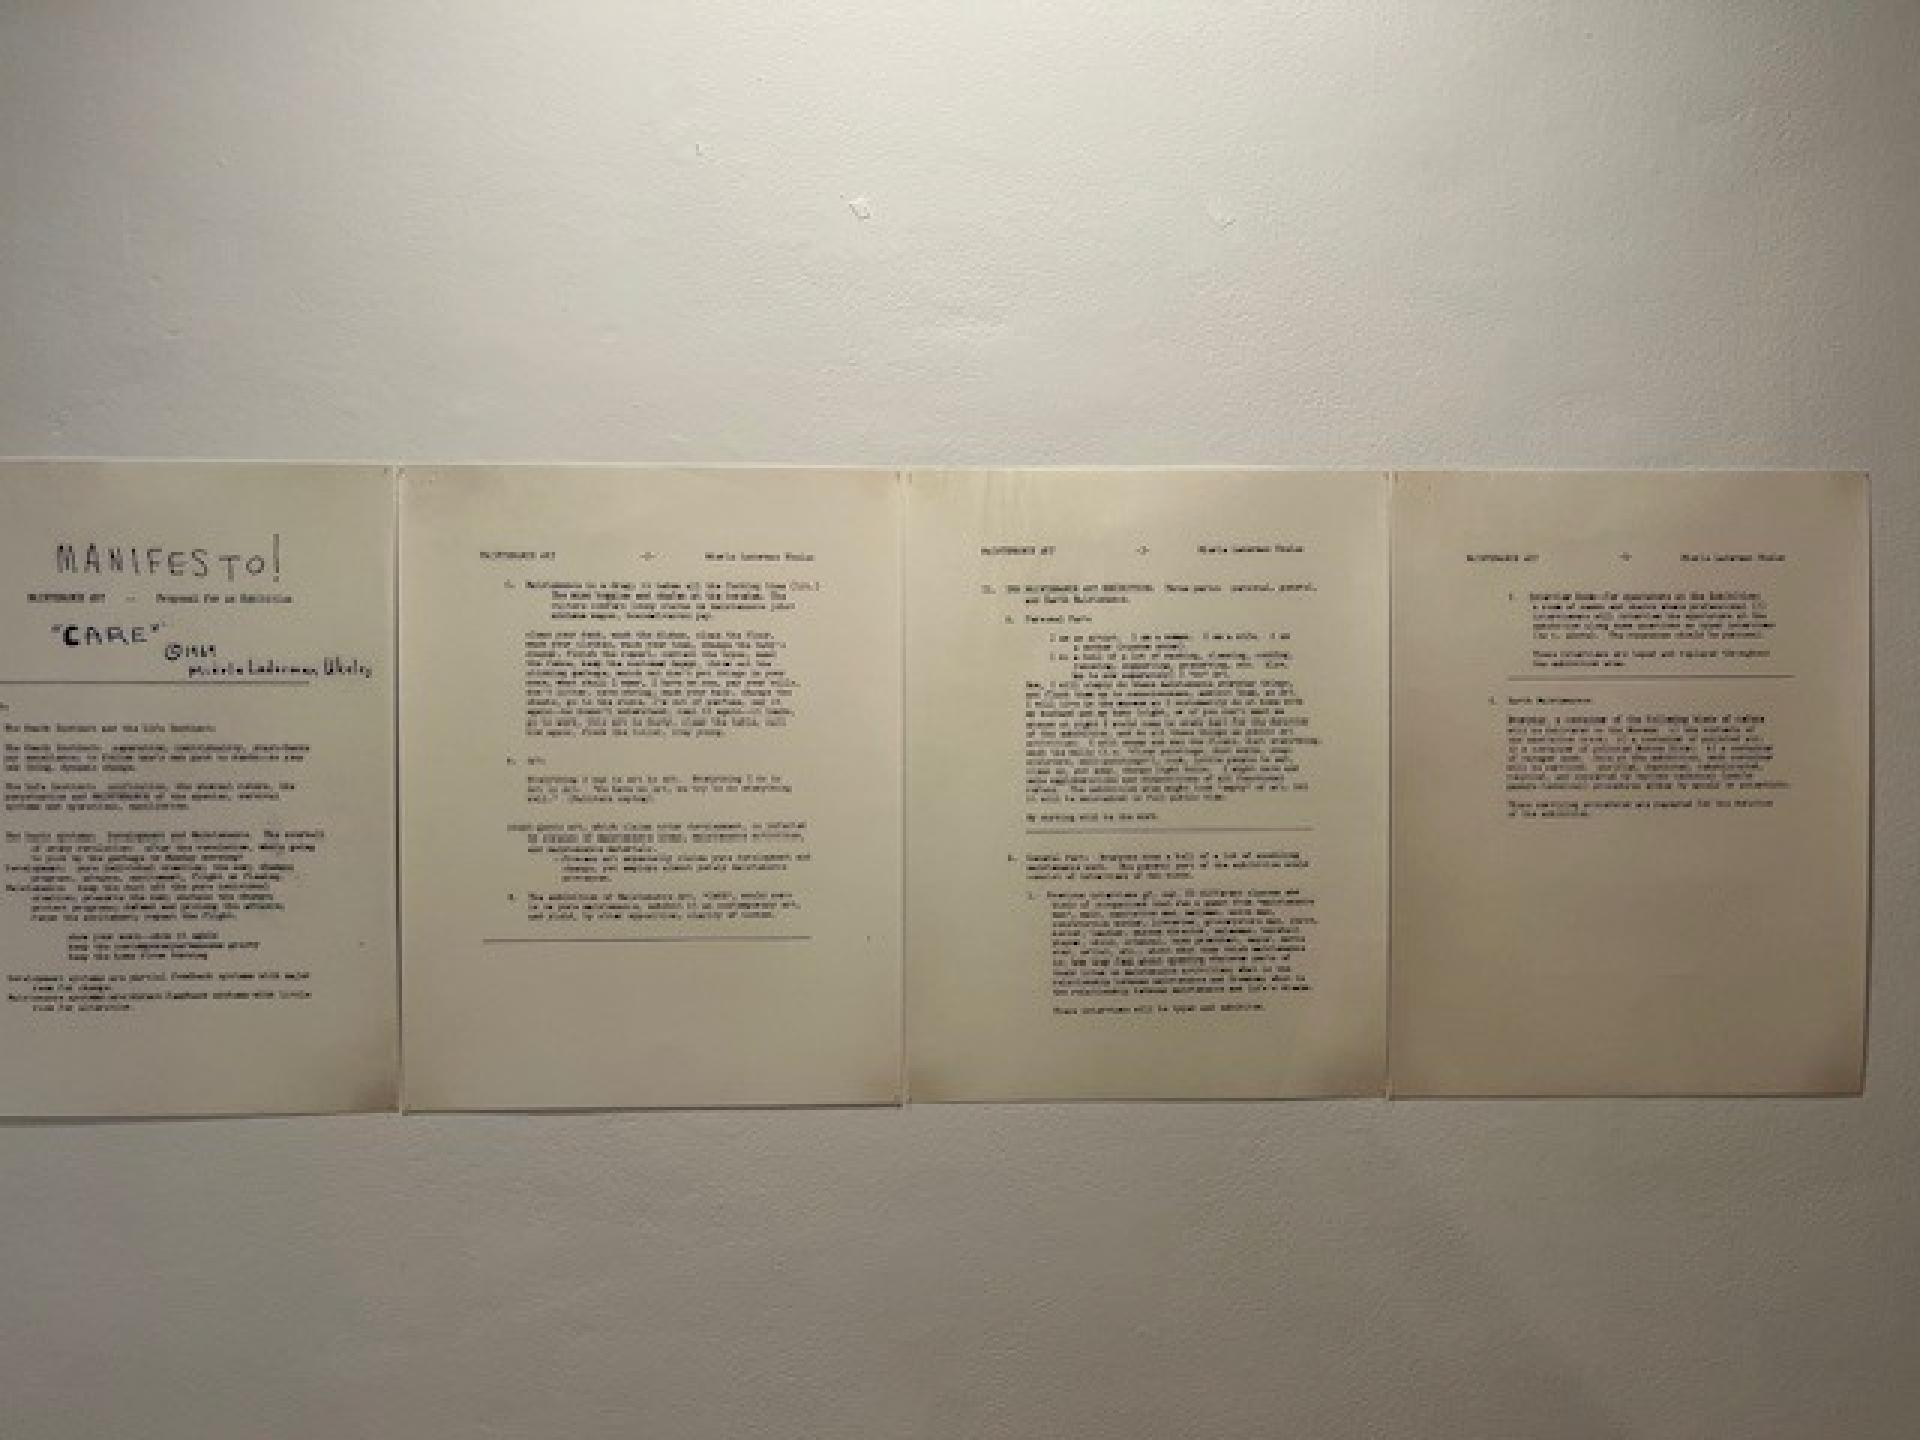 Mierle Laderman Ukeles, Manifesto for Maintenance Art, 1969! Proposal for an Exhibition “CARE”, 1969. © Mierle Laderman Ukeles. Courtesy Mierle Laderman Ukeles & Ronald Feldman Gallery, New York